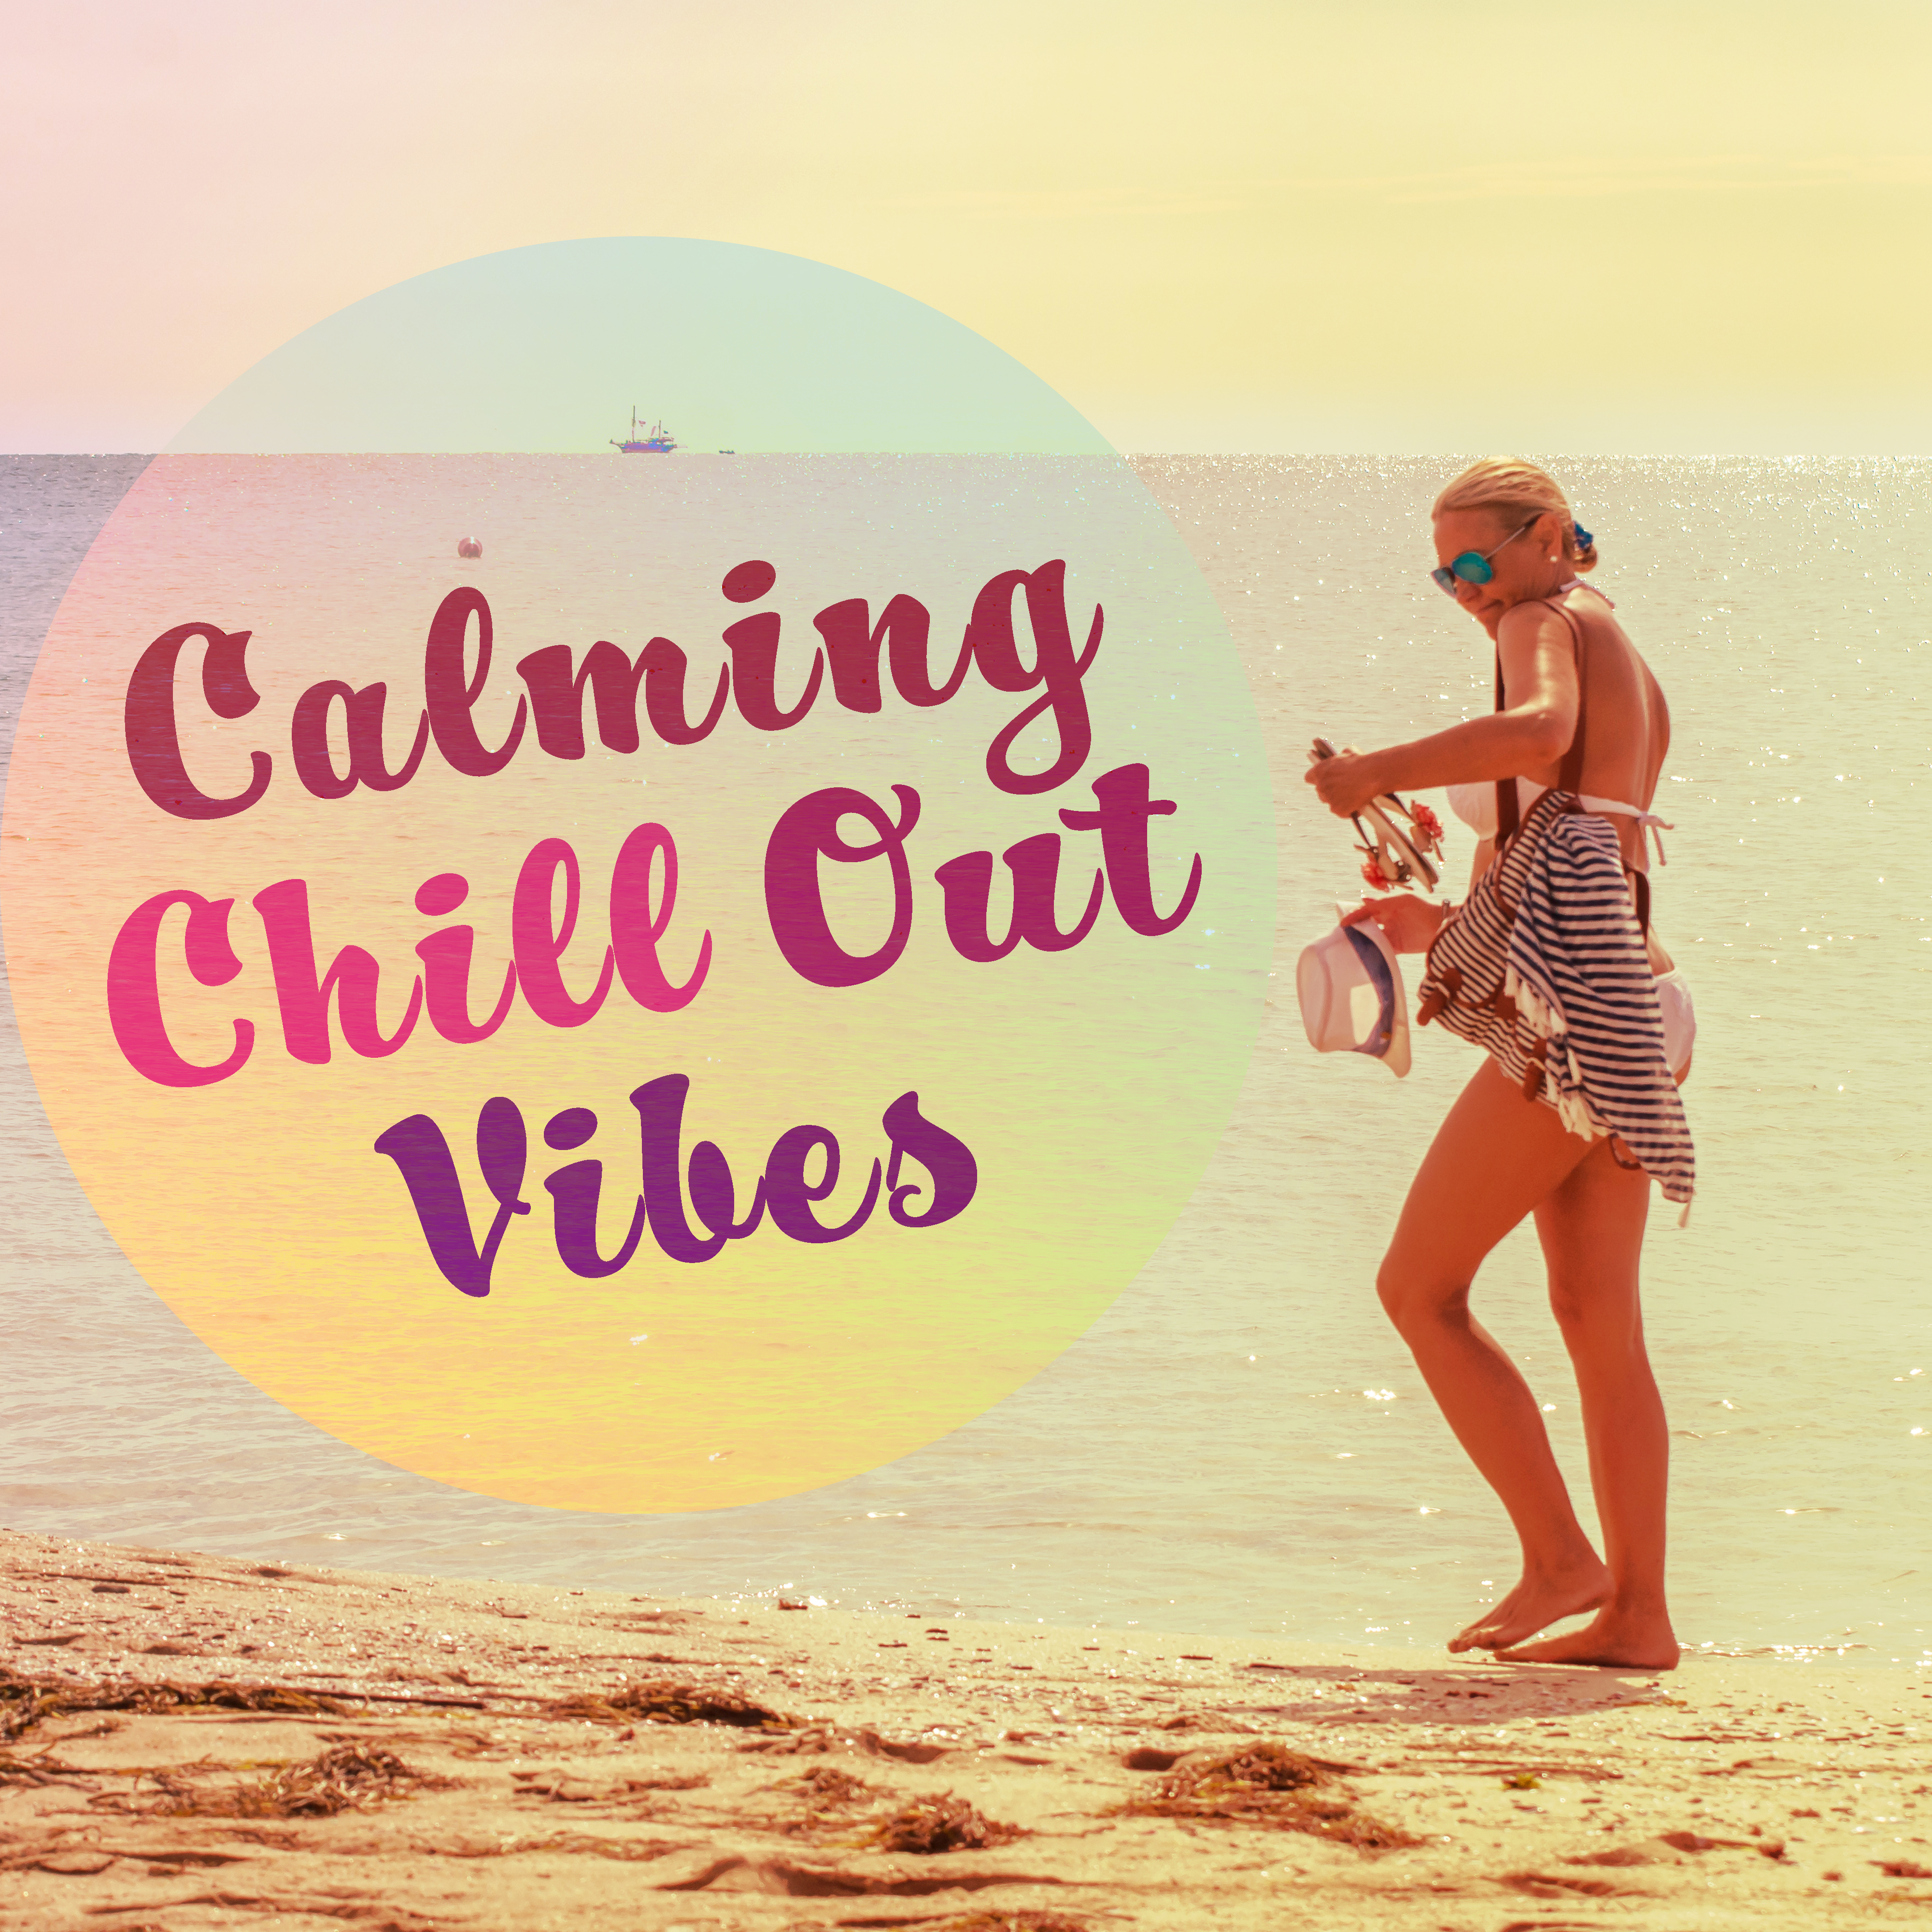 Calming Chill Out Vibes – Holiday Rest, Summer Vibes, Rest with Chill Out Music, Sounds for Journey